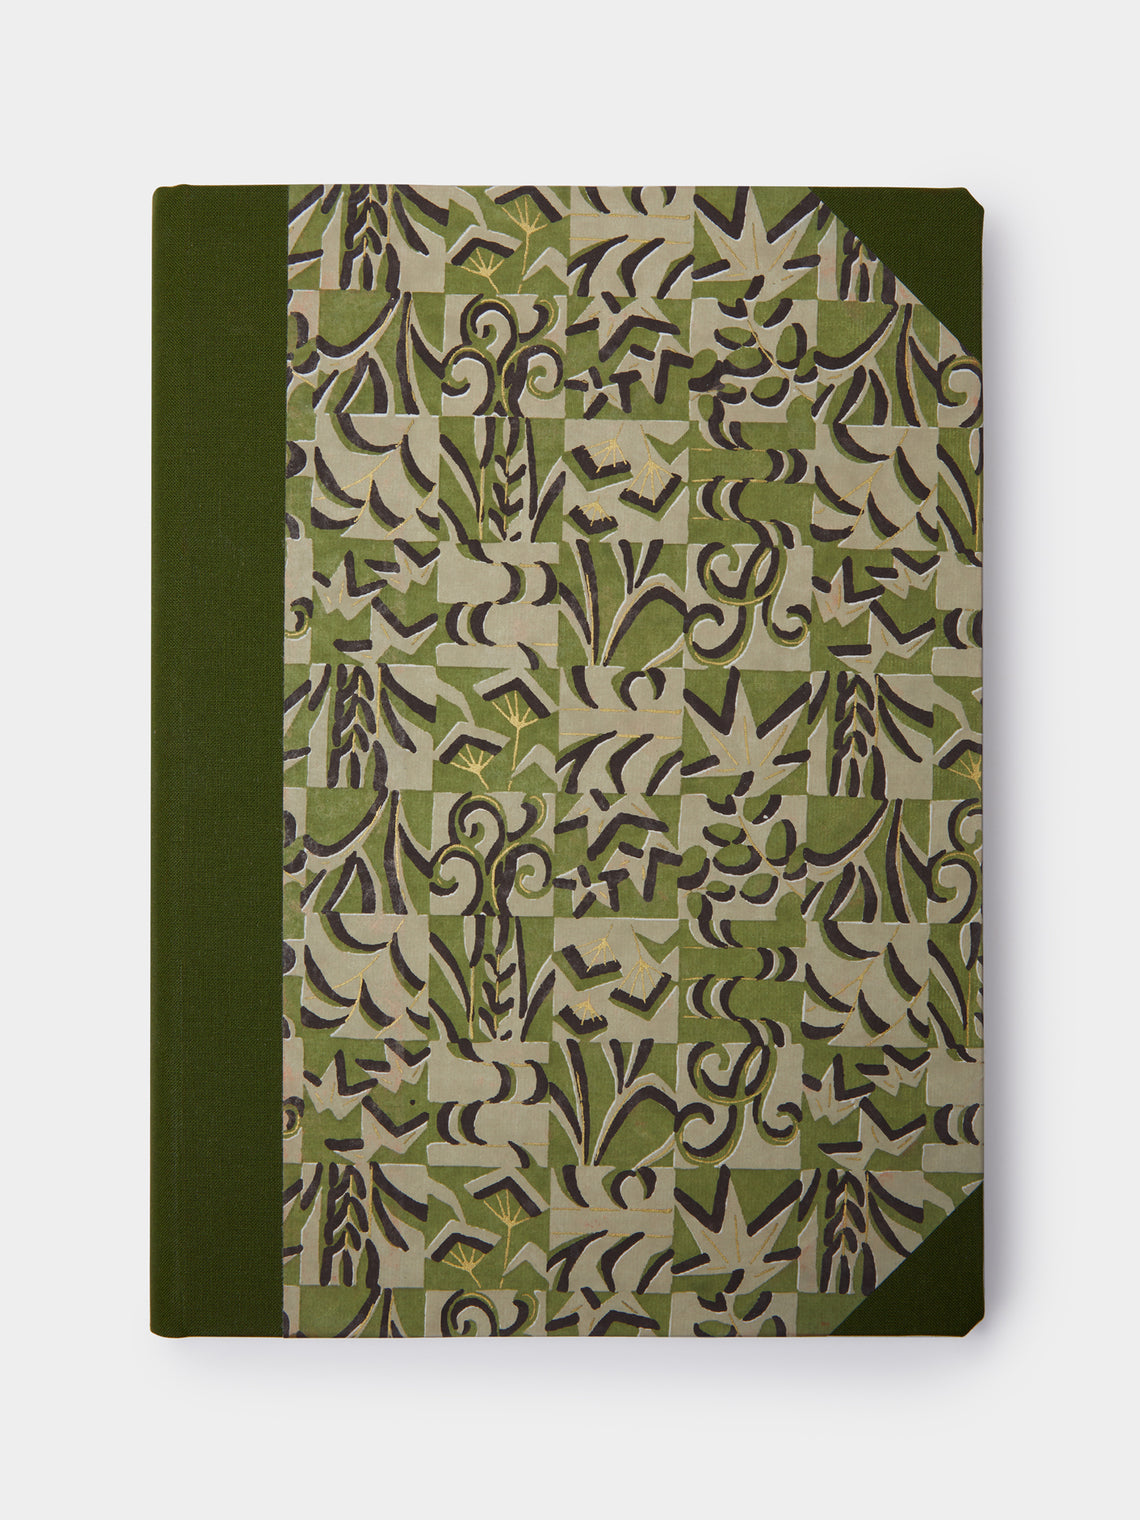 Choosing Keeping - Extra Thick Composition Ledger Notebook - Green - ABASK - 